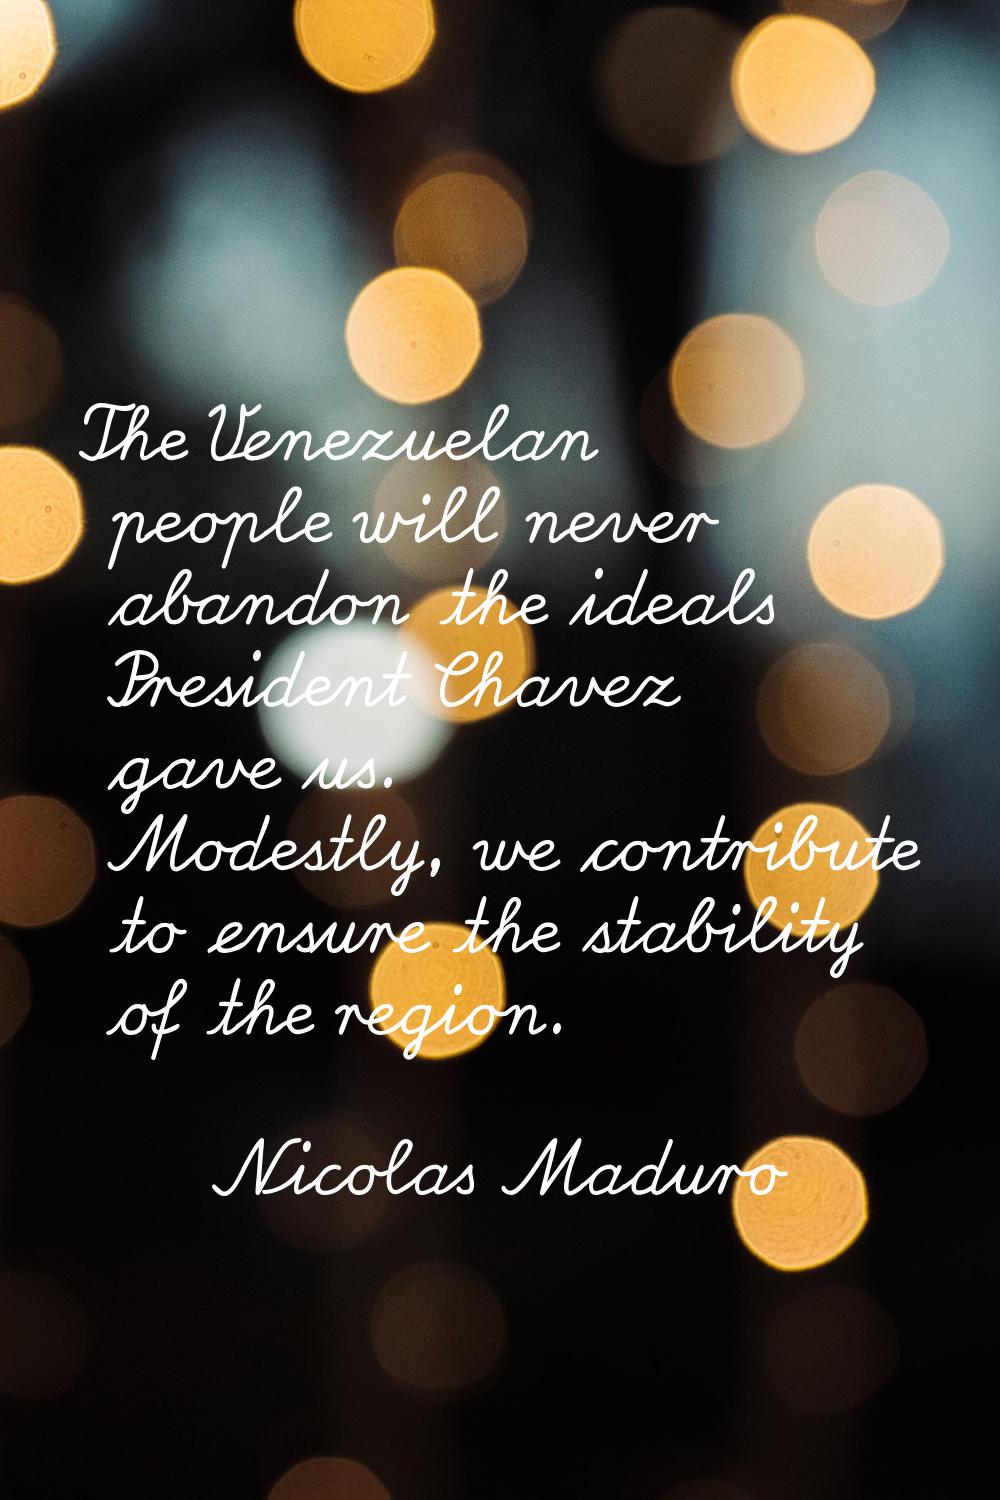 The Venezuelan people will never abandon the ideals President Chavez gave us. Modestly, we contribu